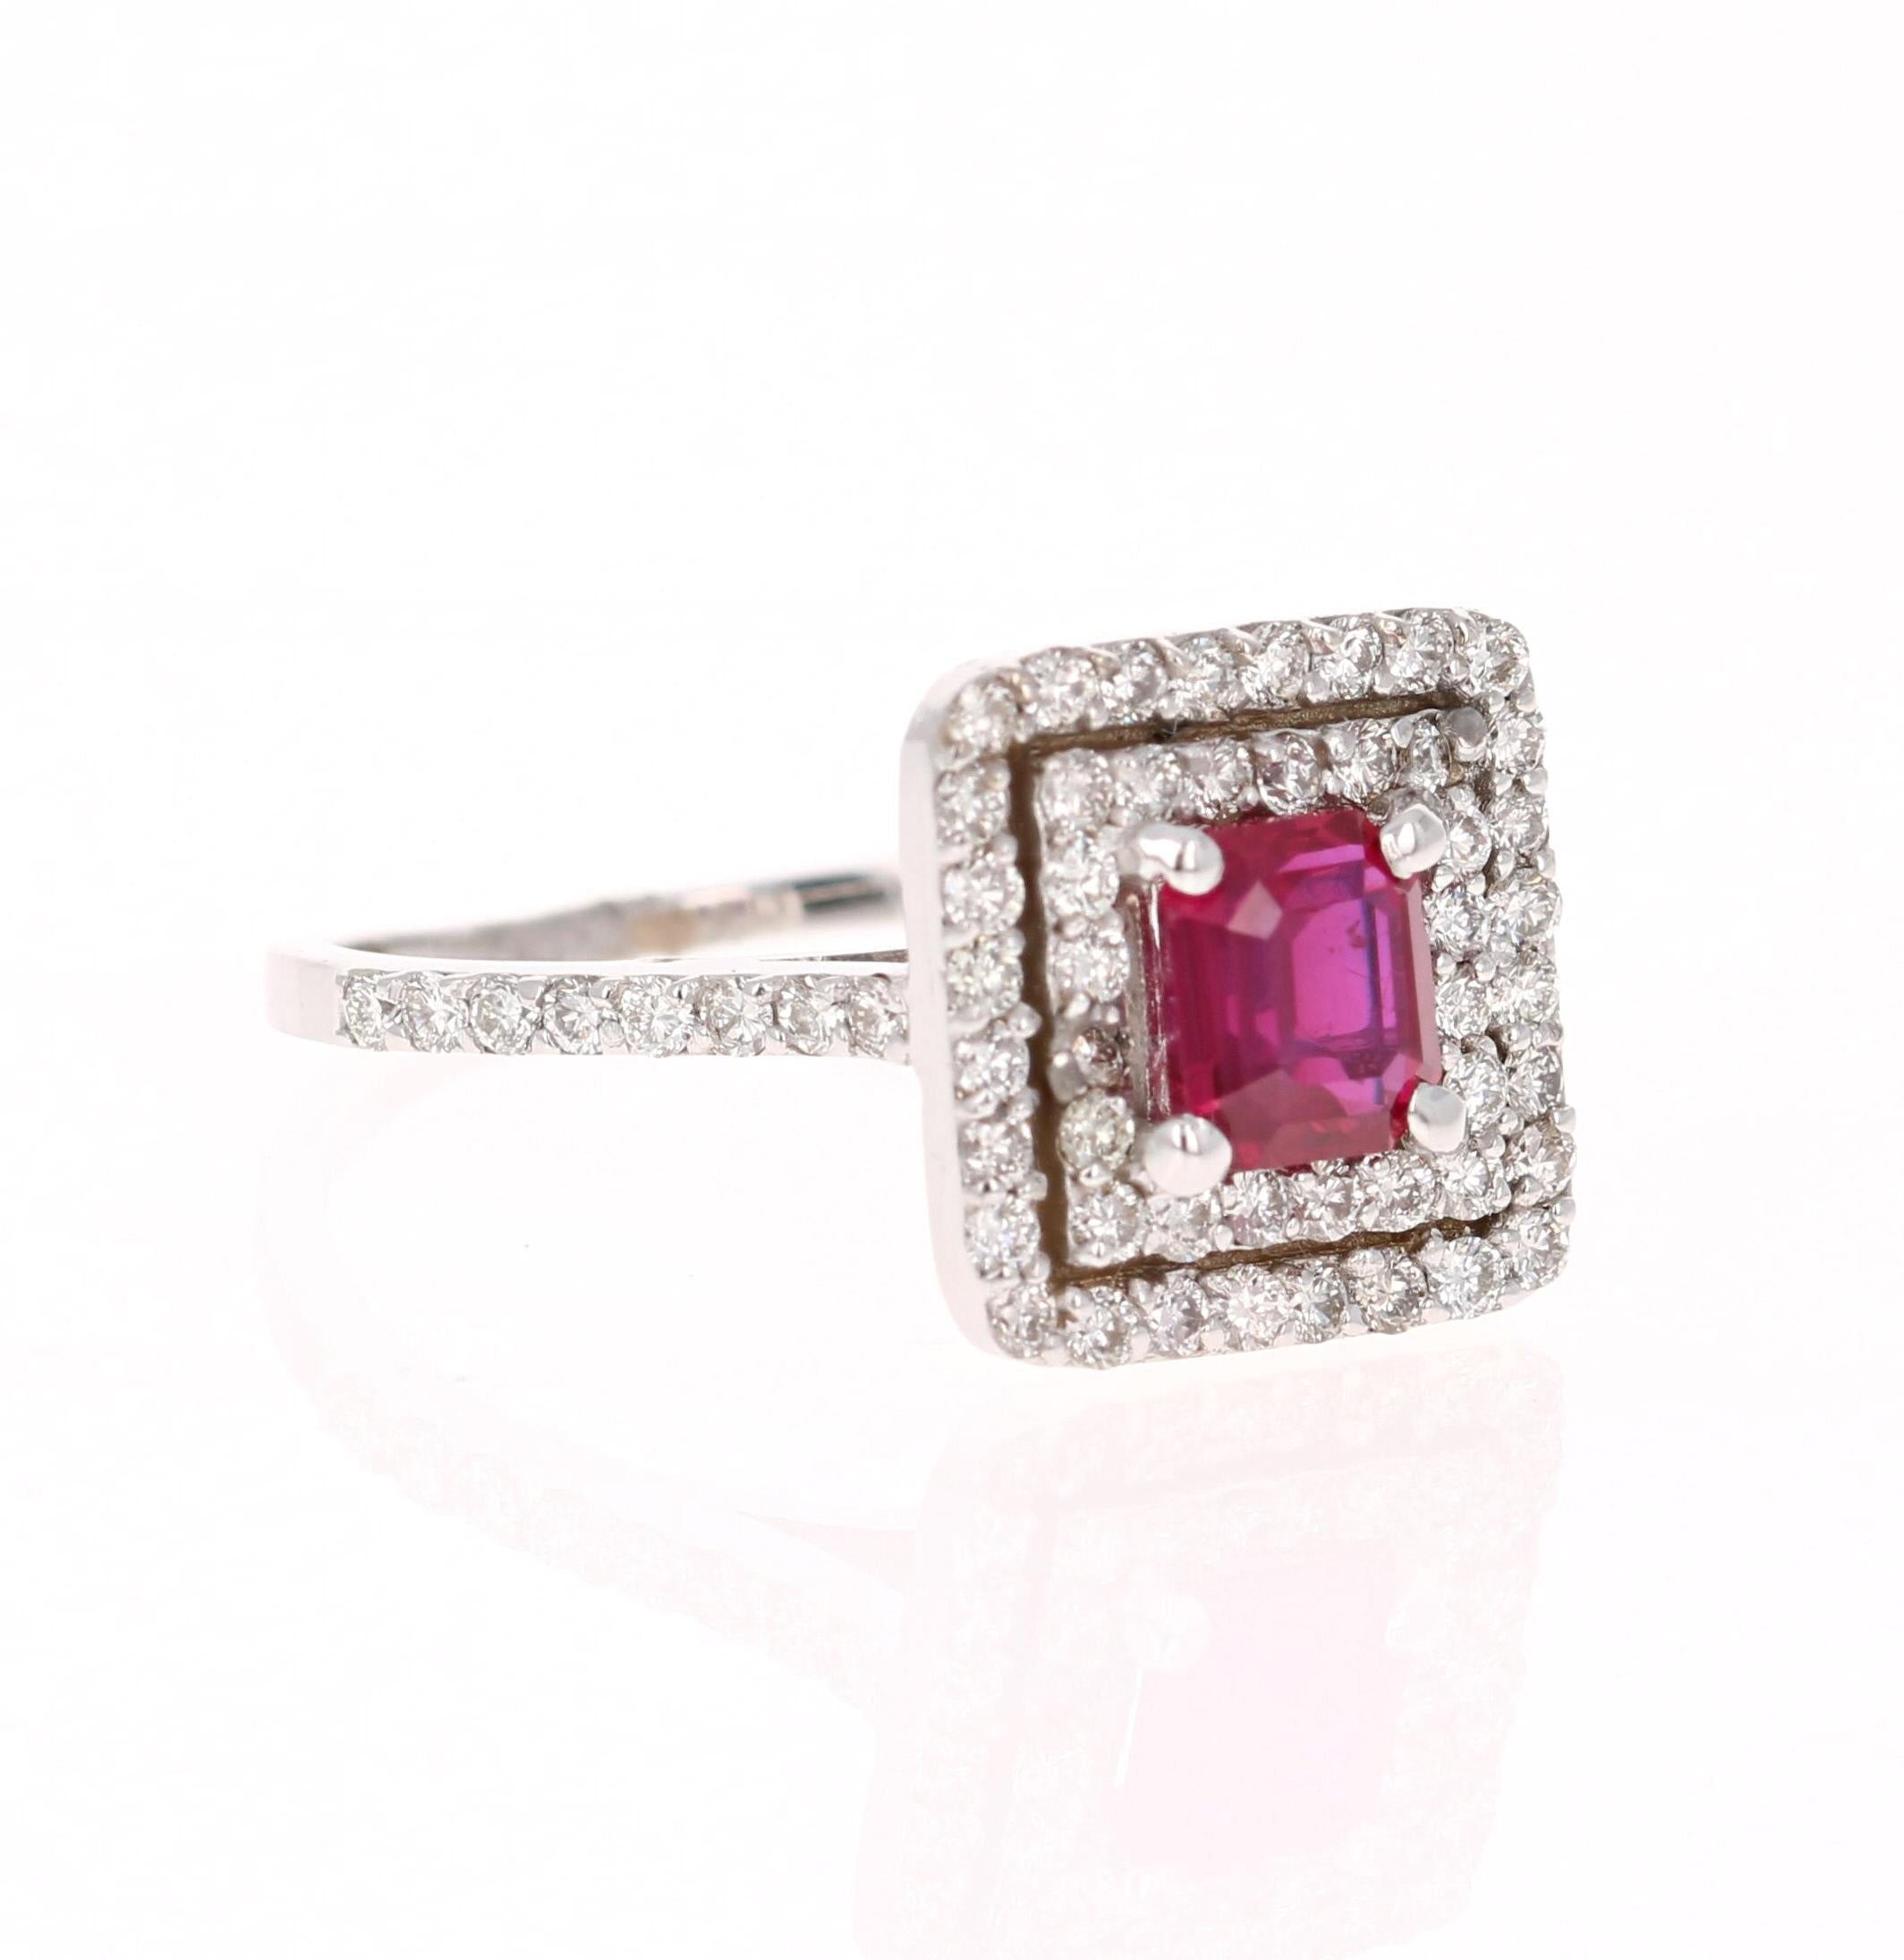 A simple and beautiful ring with a 1.08 Carat Asscher Cut Natural Ruby as its center and 64 Round Cut Diamonds that weigh 0.75 Carats.  The Clarity and Color of the Diamonds are VS2 and H Color. The total carat weight of the ring is 1.83